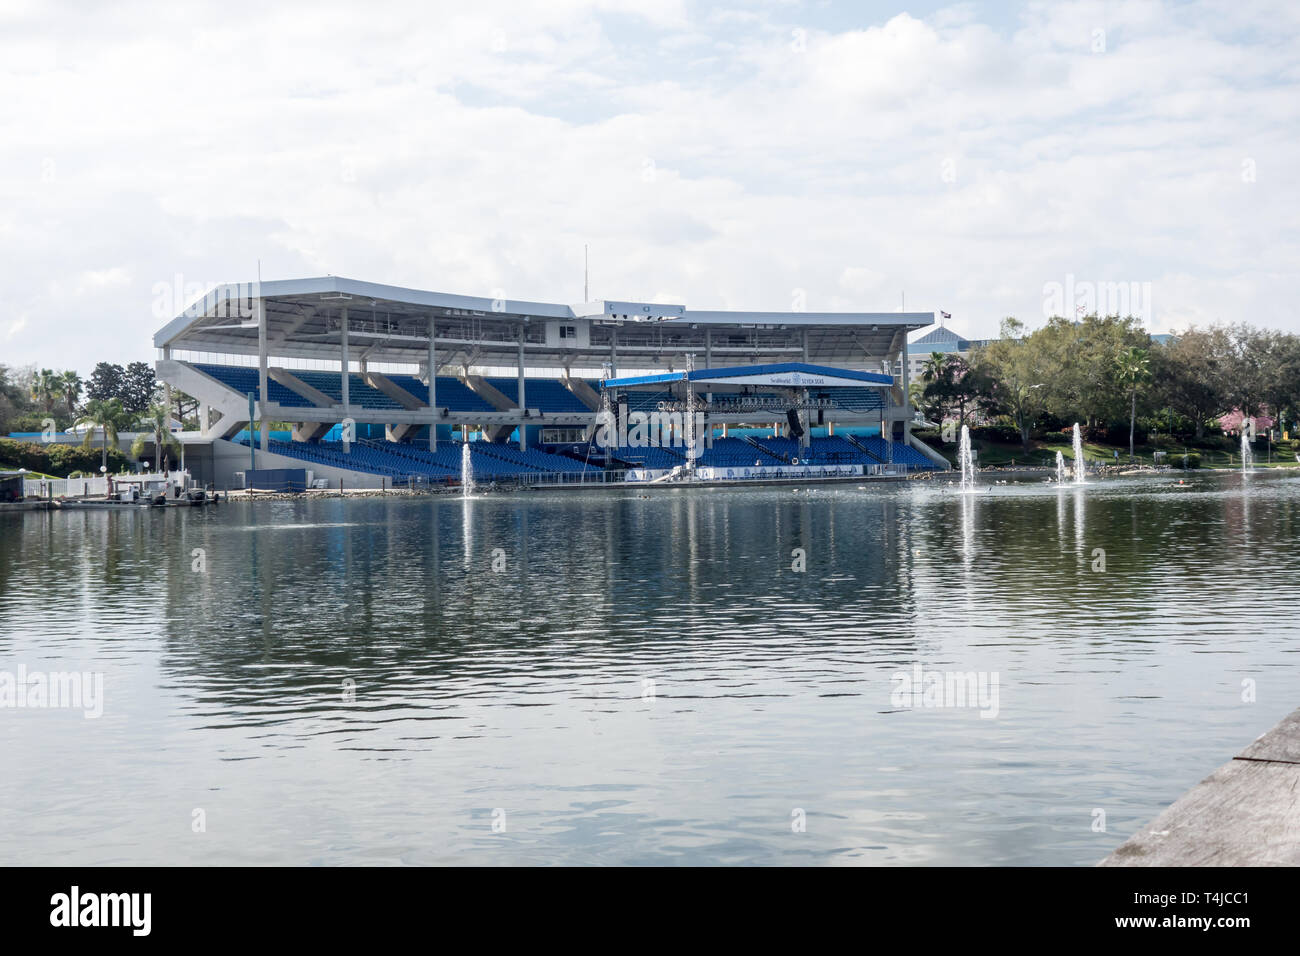 The Empty seats at Bayside Stadium where spectators can watch numerous music concerts and special events at Seaworld in Orlando. Stock Photo